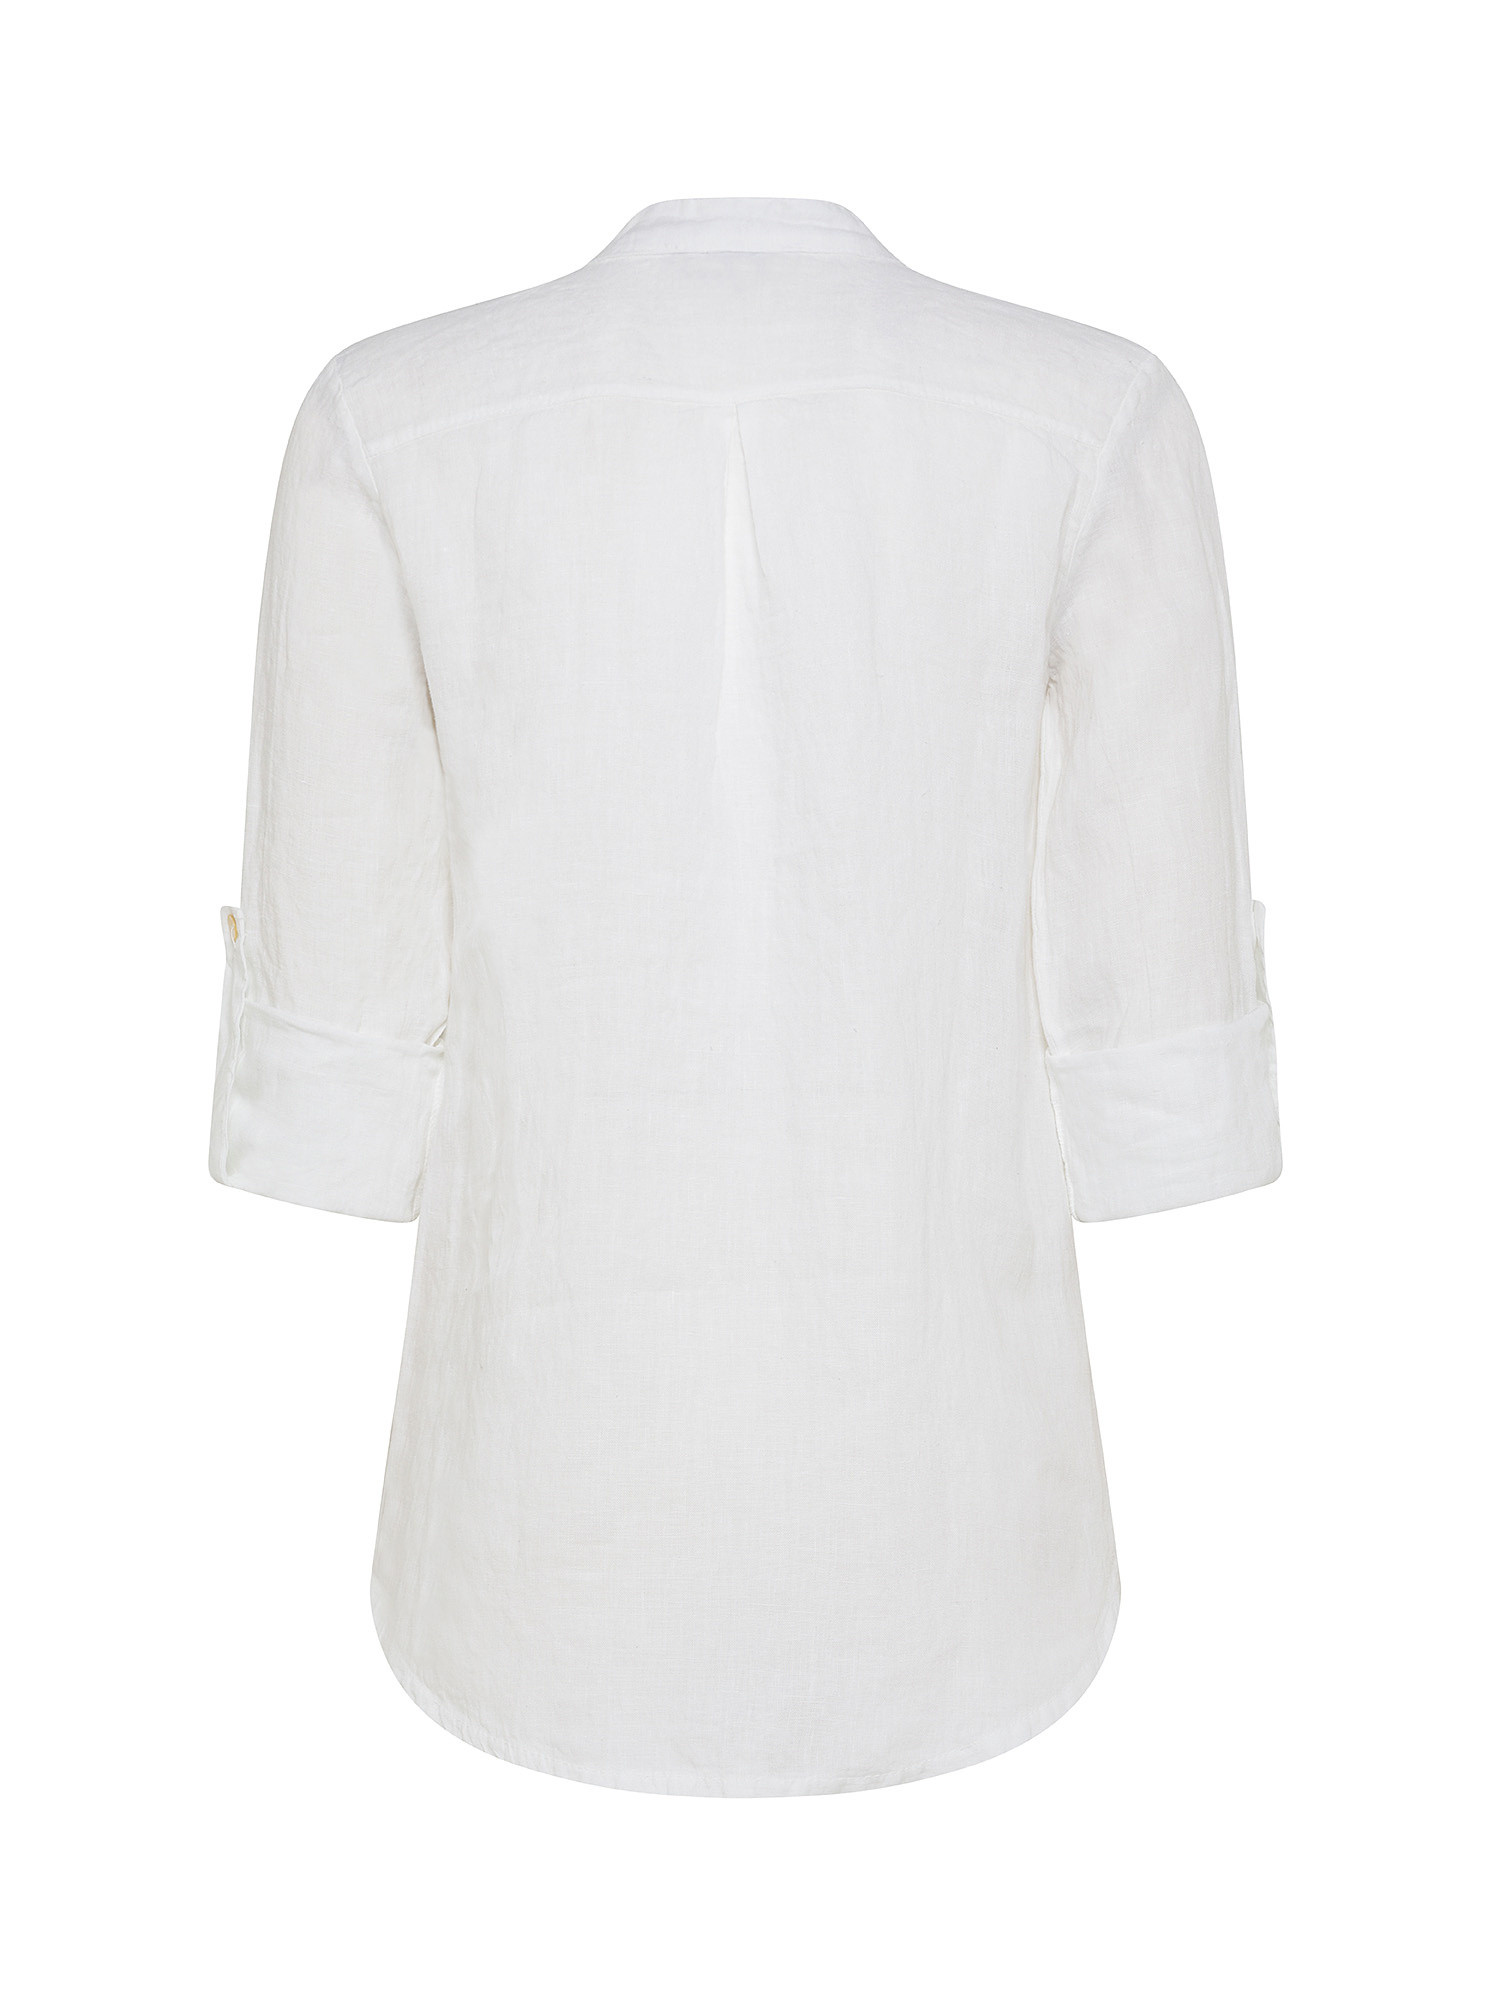 Koan - Linen blouse with pocket, White, large image number 1